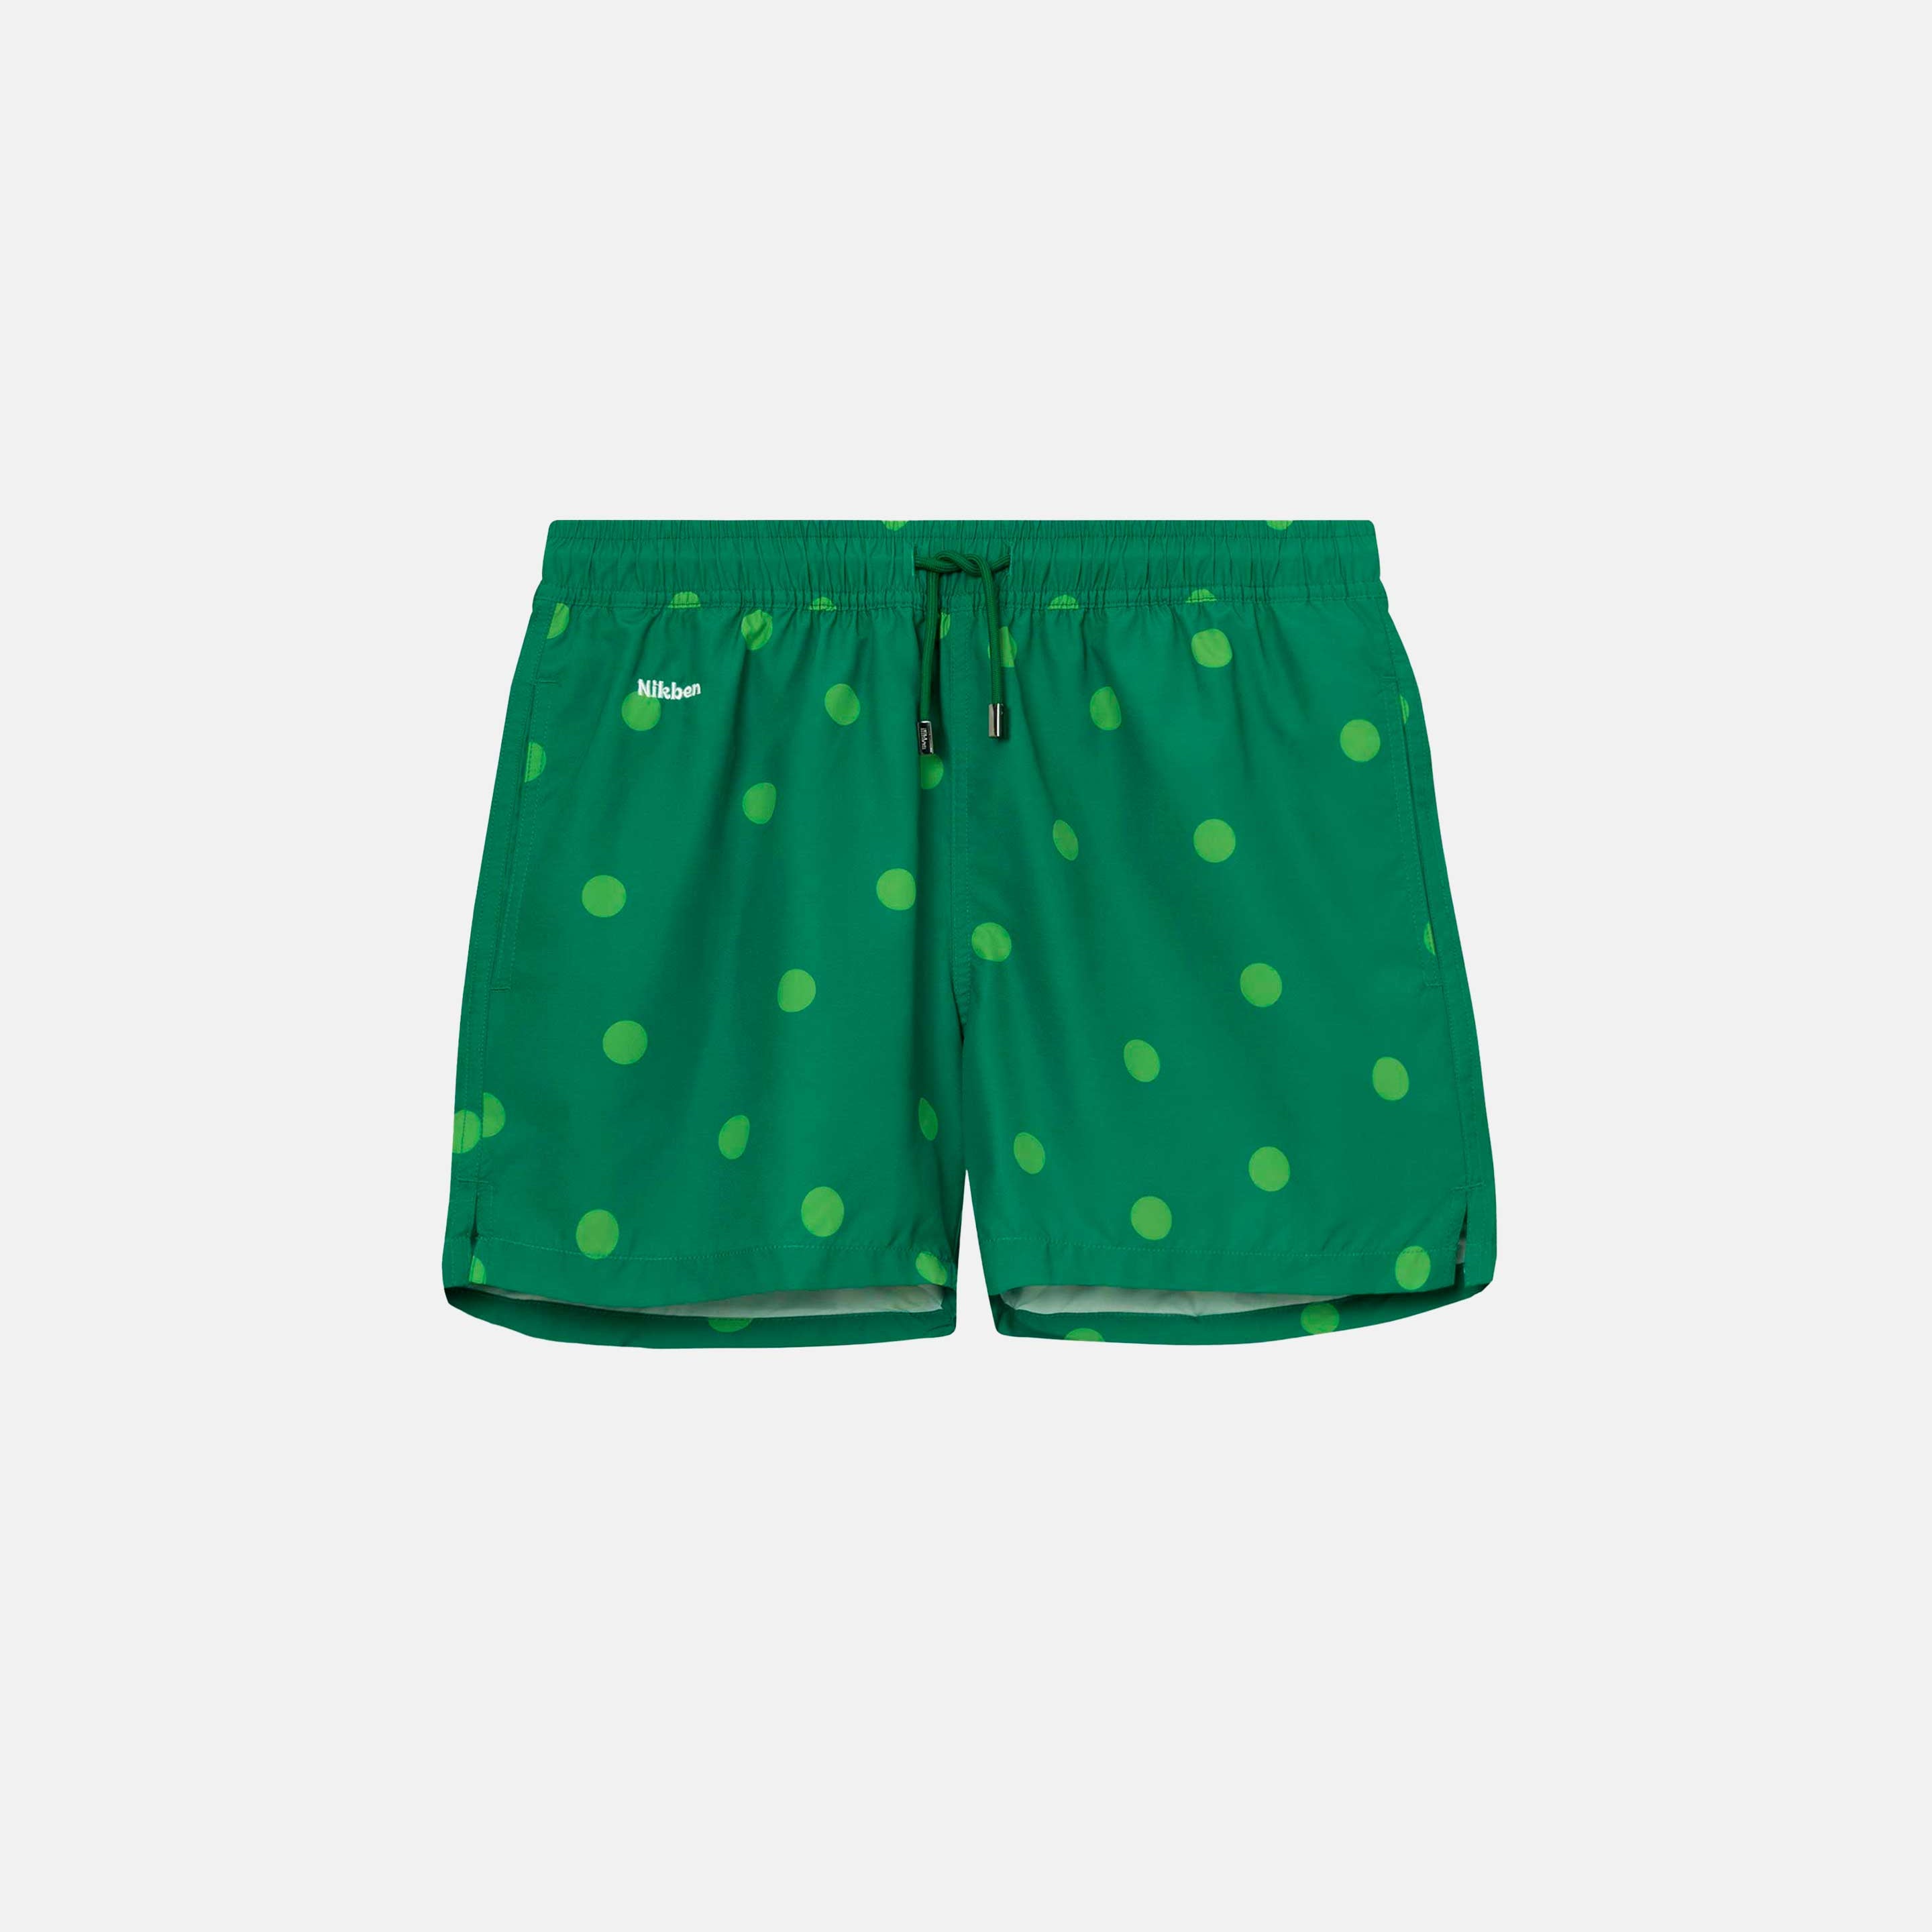 Green swim trunks with light green dots print. Mid length shorts with drawstring waistband and two side pockets.